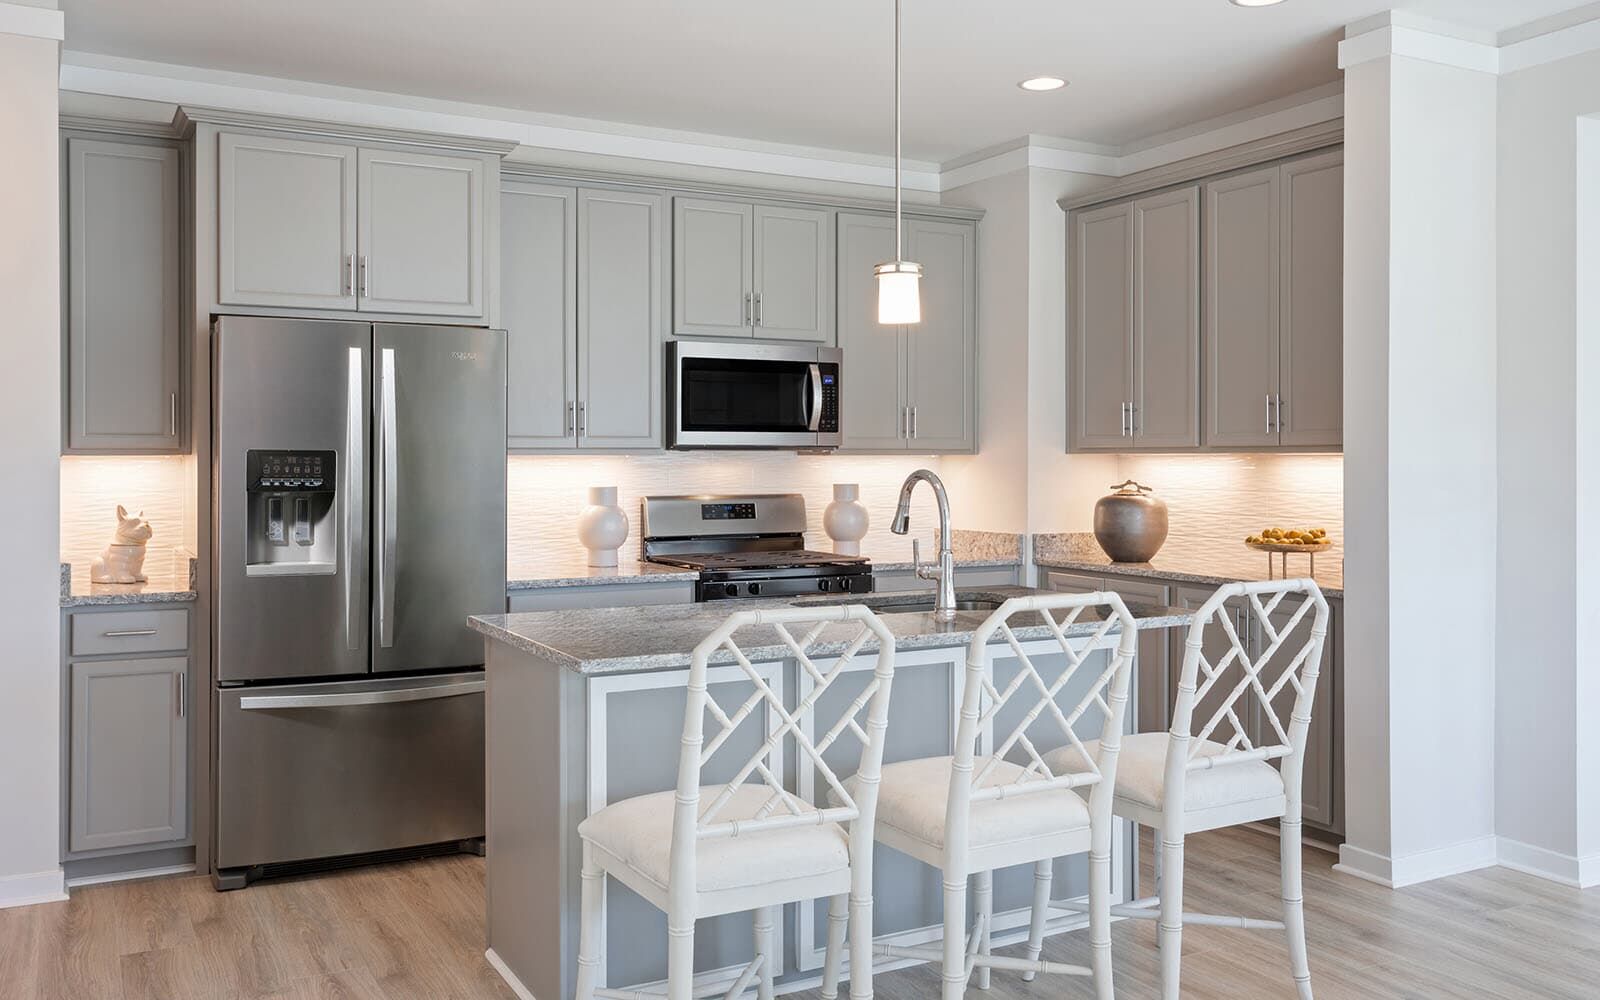 Kitchen:The kitchen of the Dillon villa as modeled at Heritage Shores